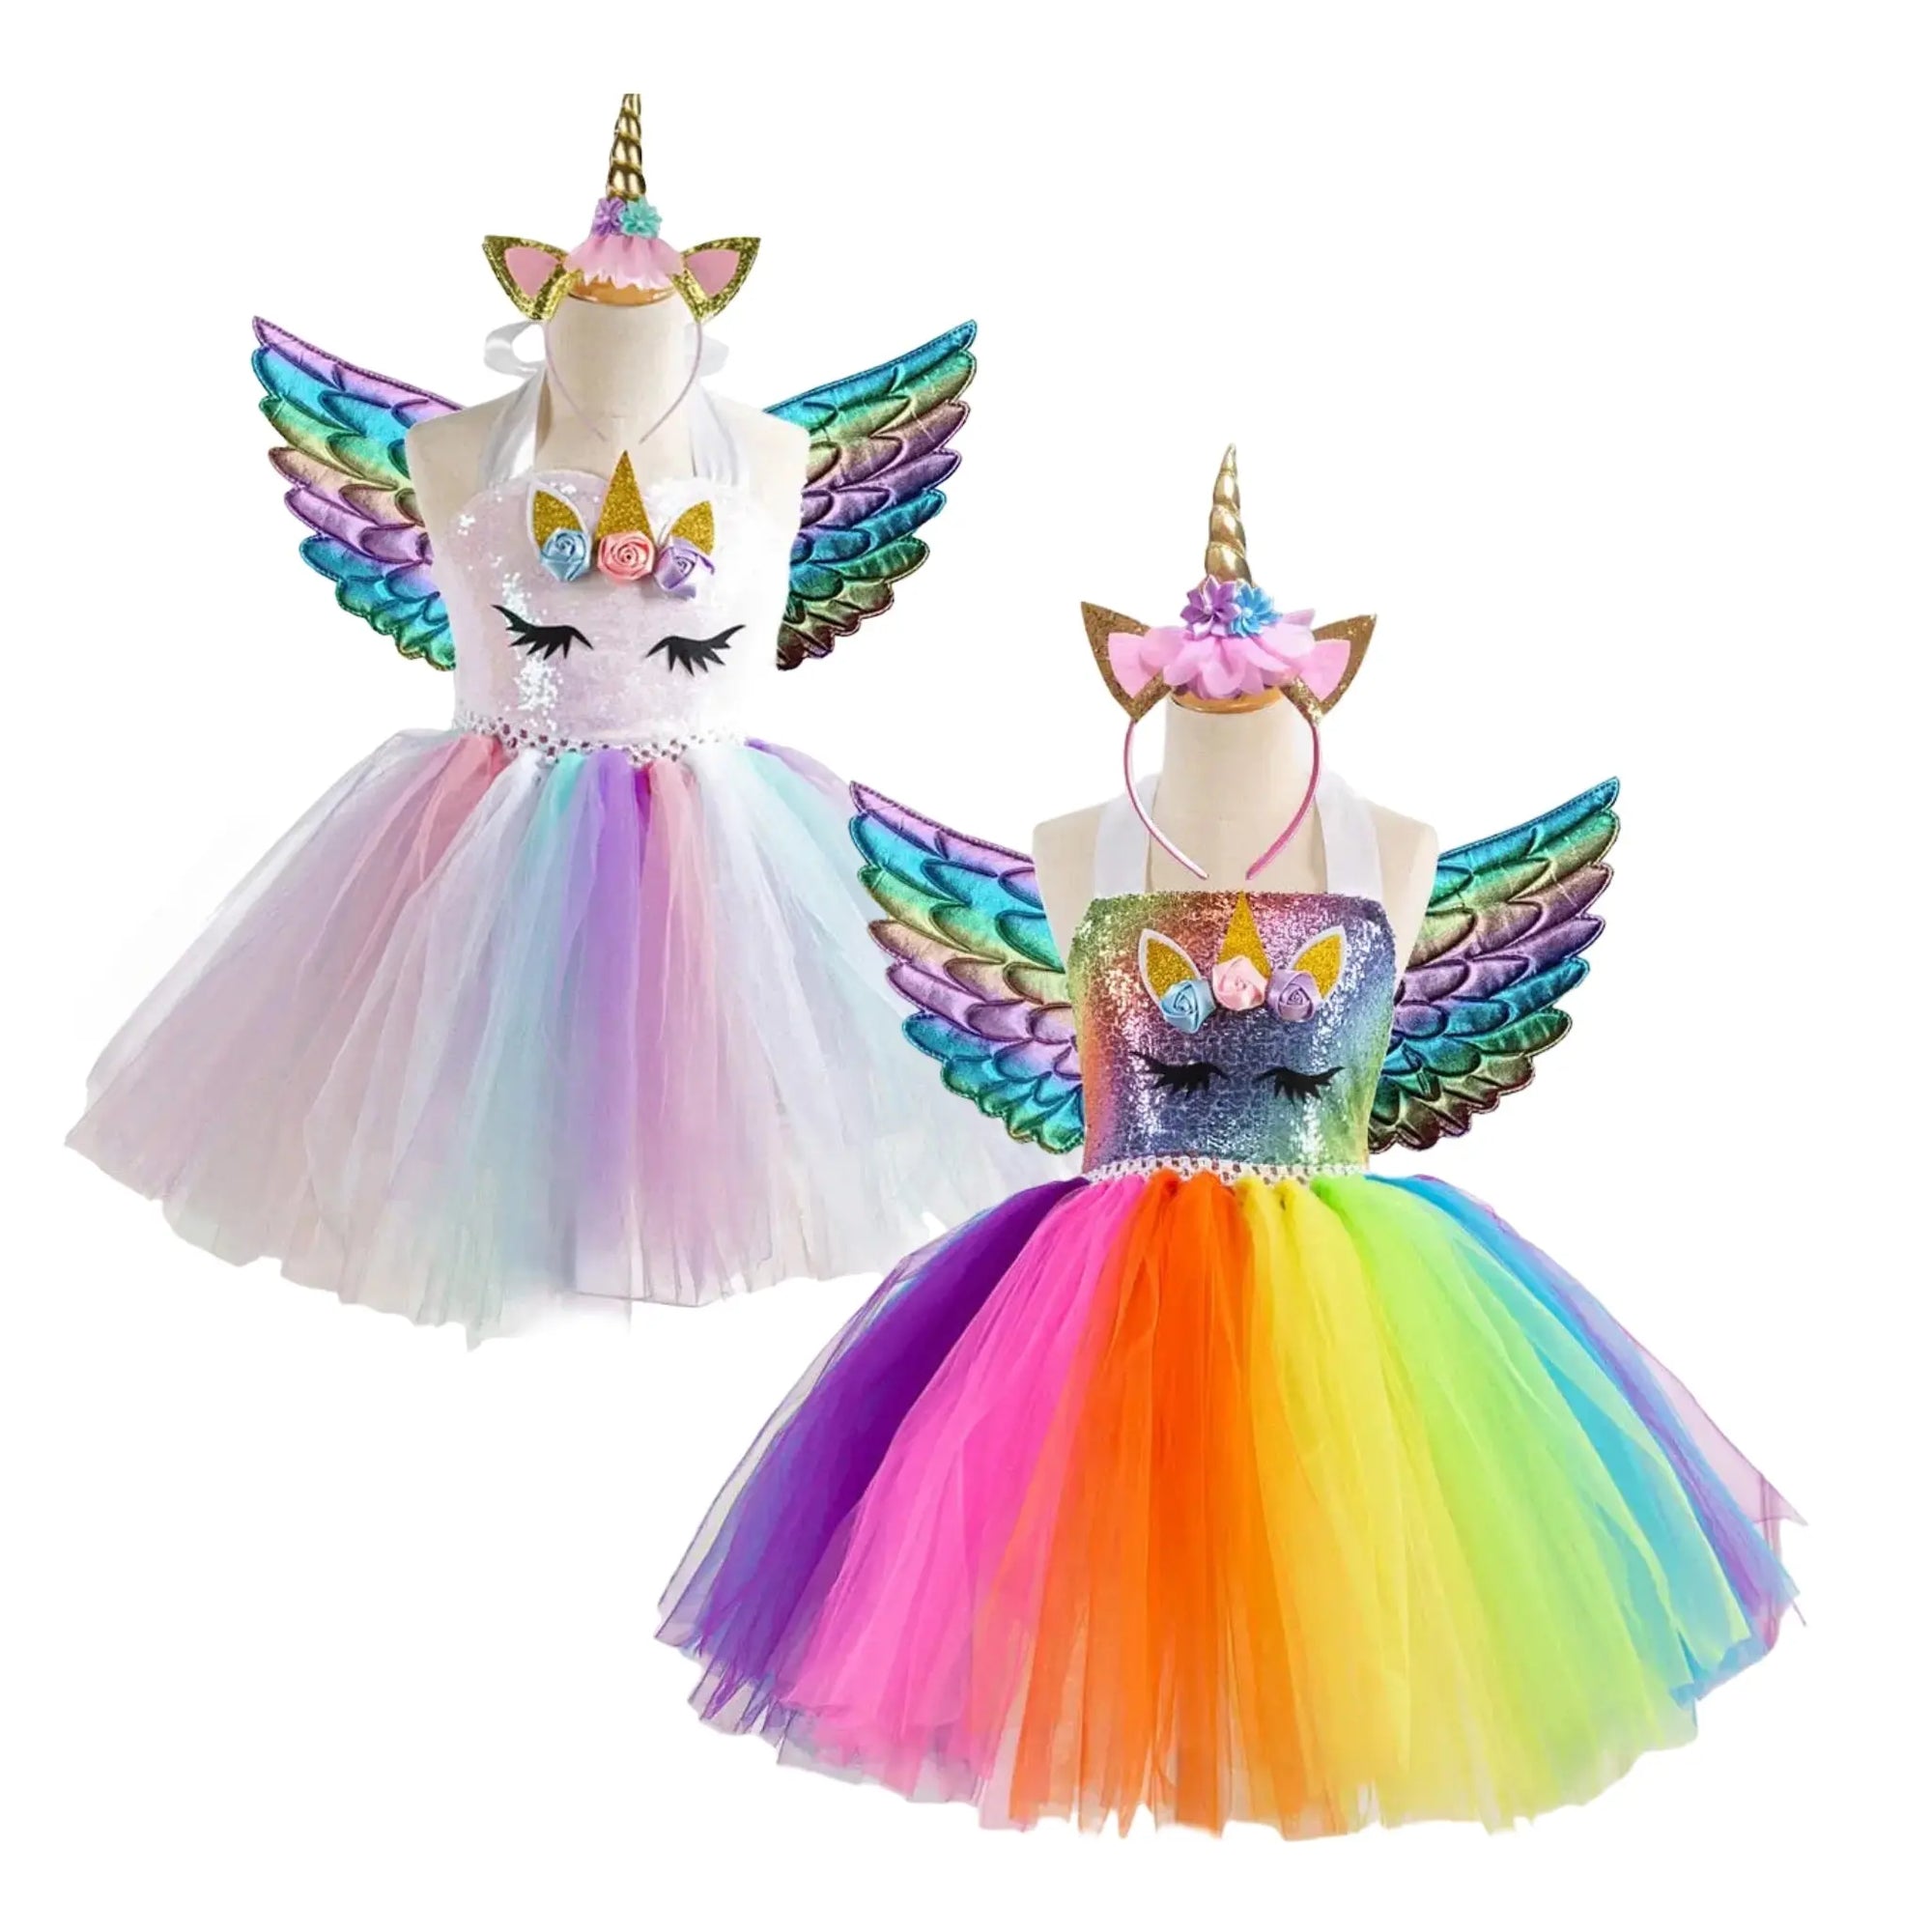 Girls Sequin Unicorn Costume Rainbow Princess Tutu Dress with Wings Bling Bling Baby Boutique